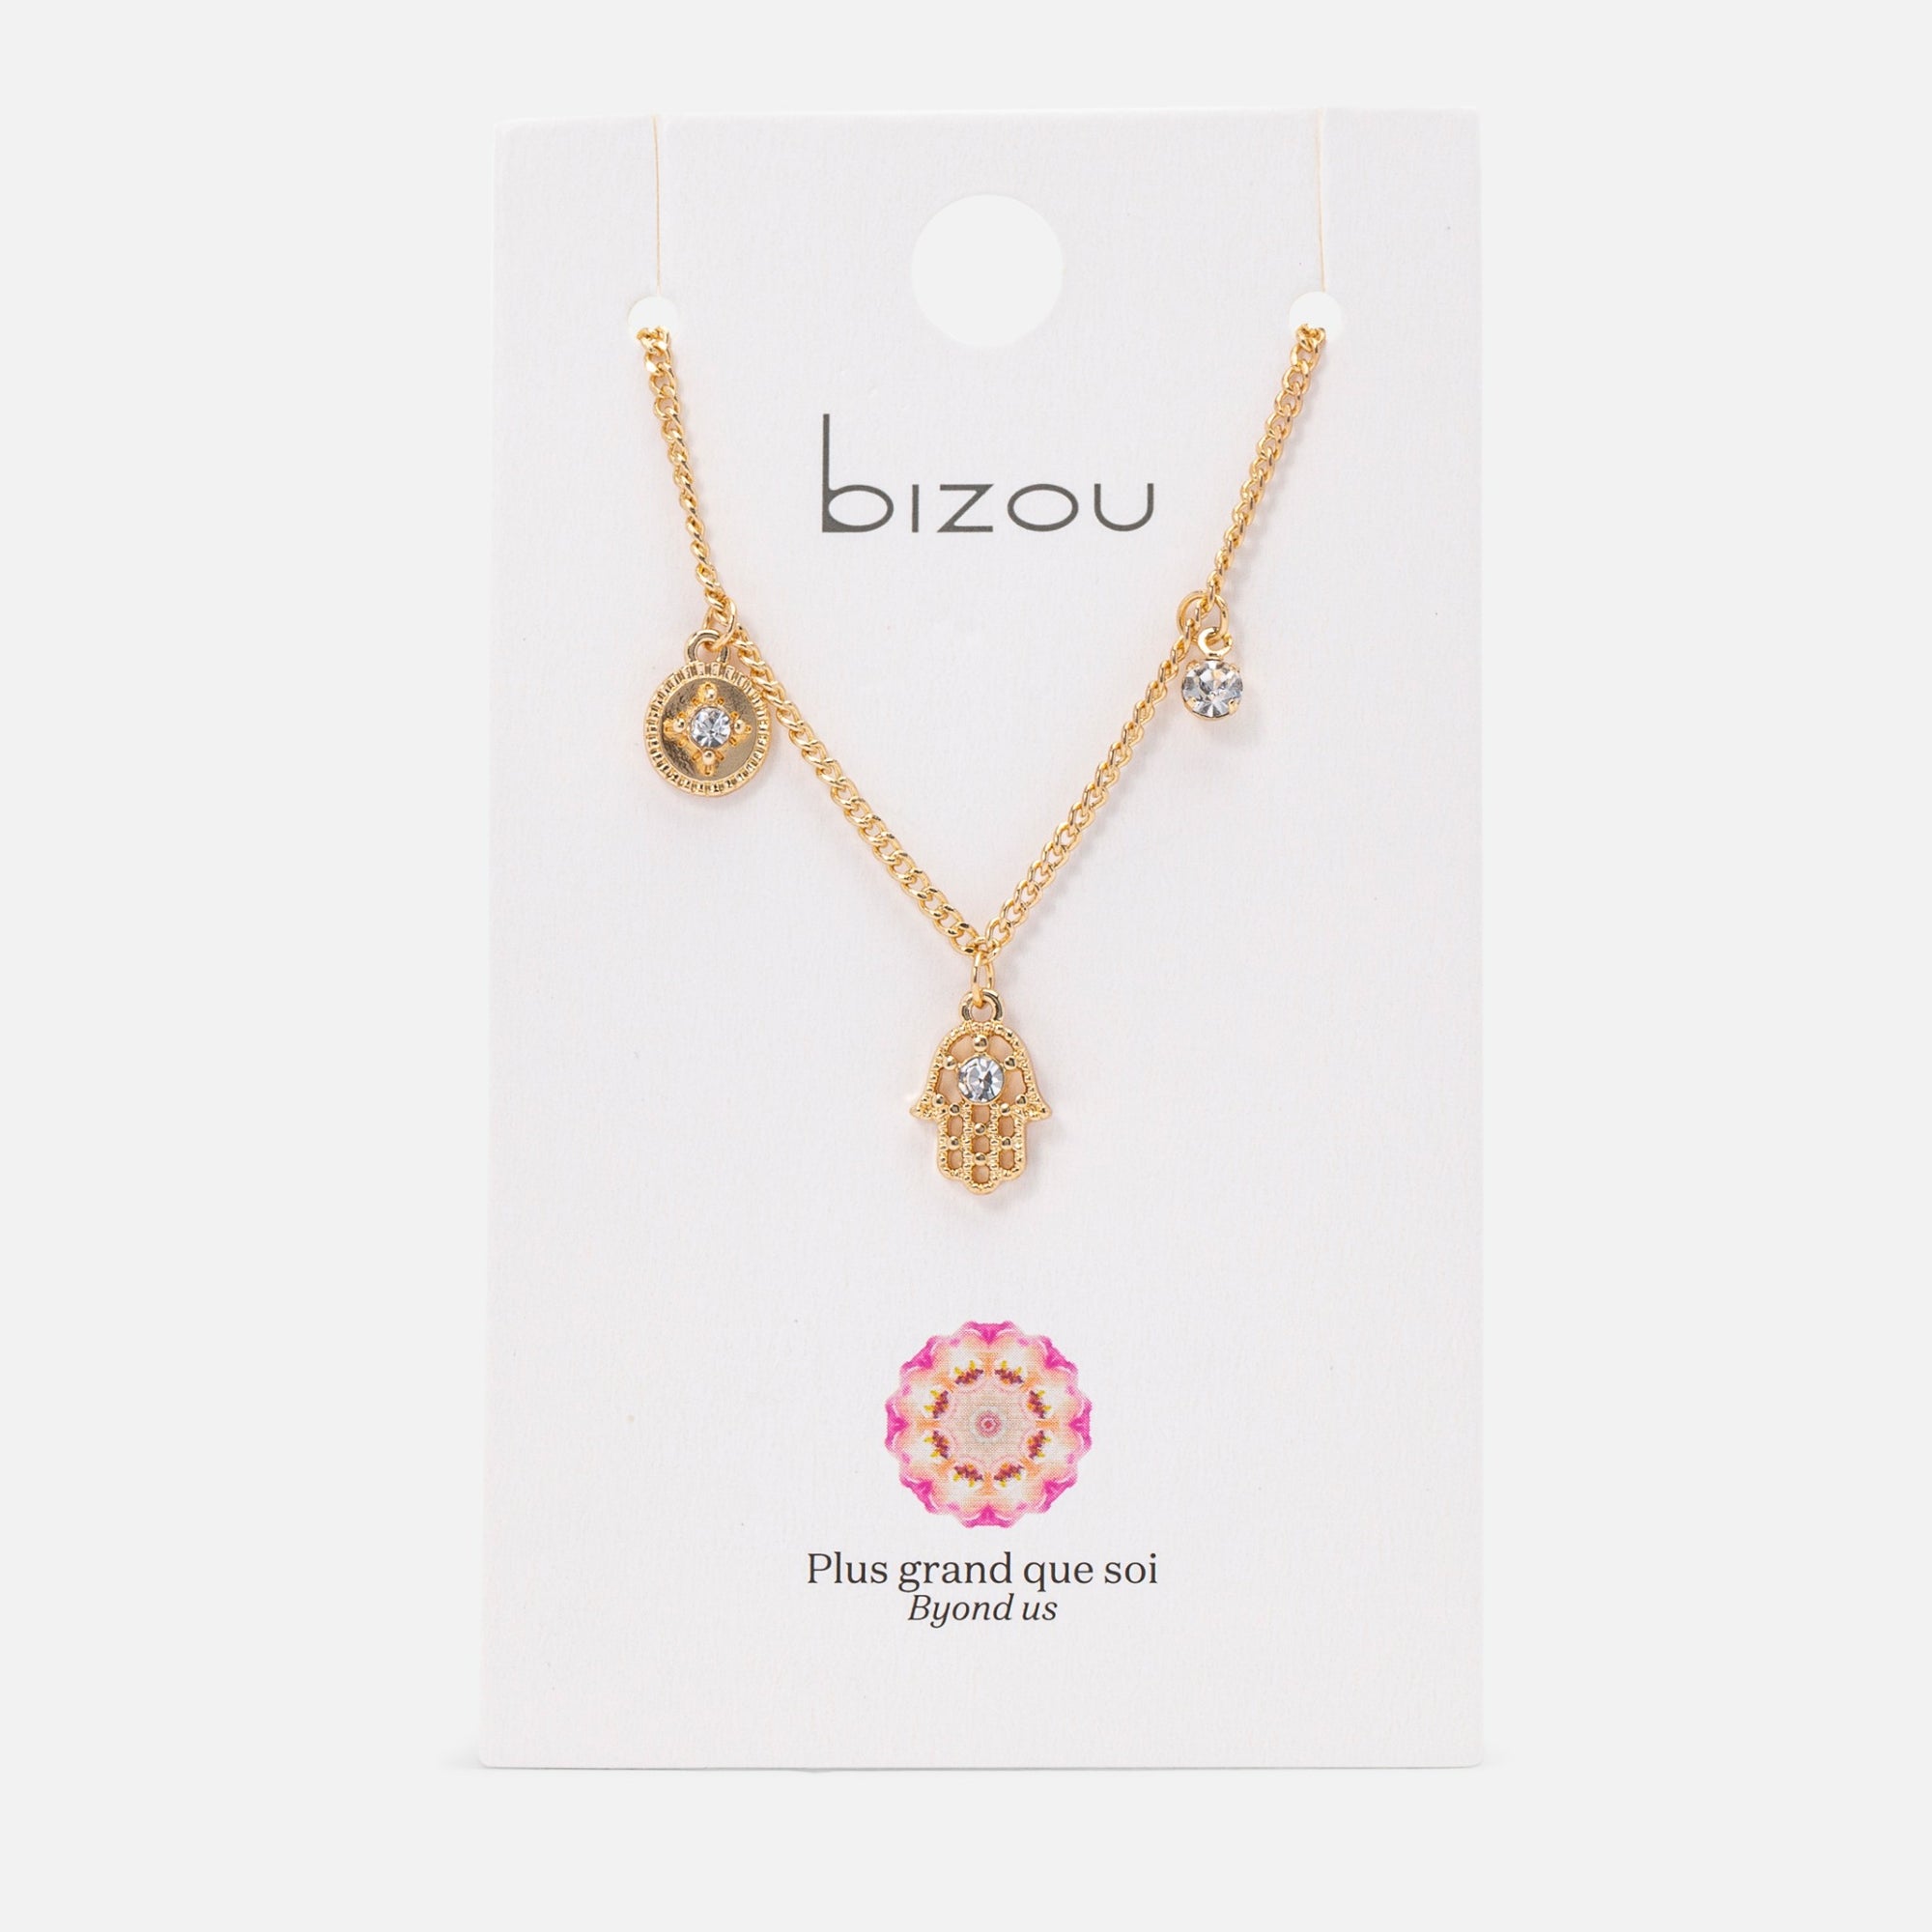 Golden necklace with spiritual charms